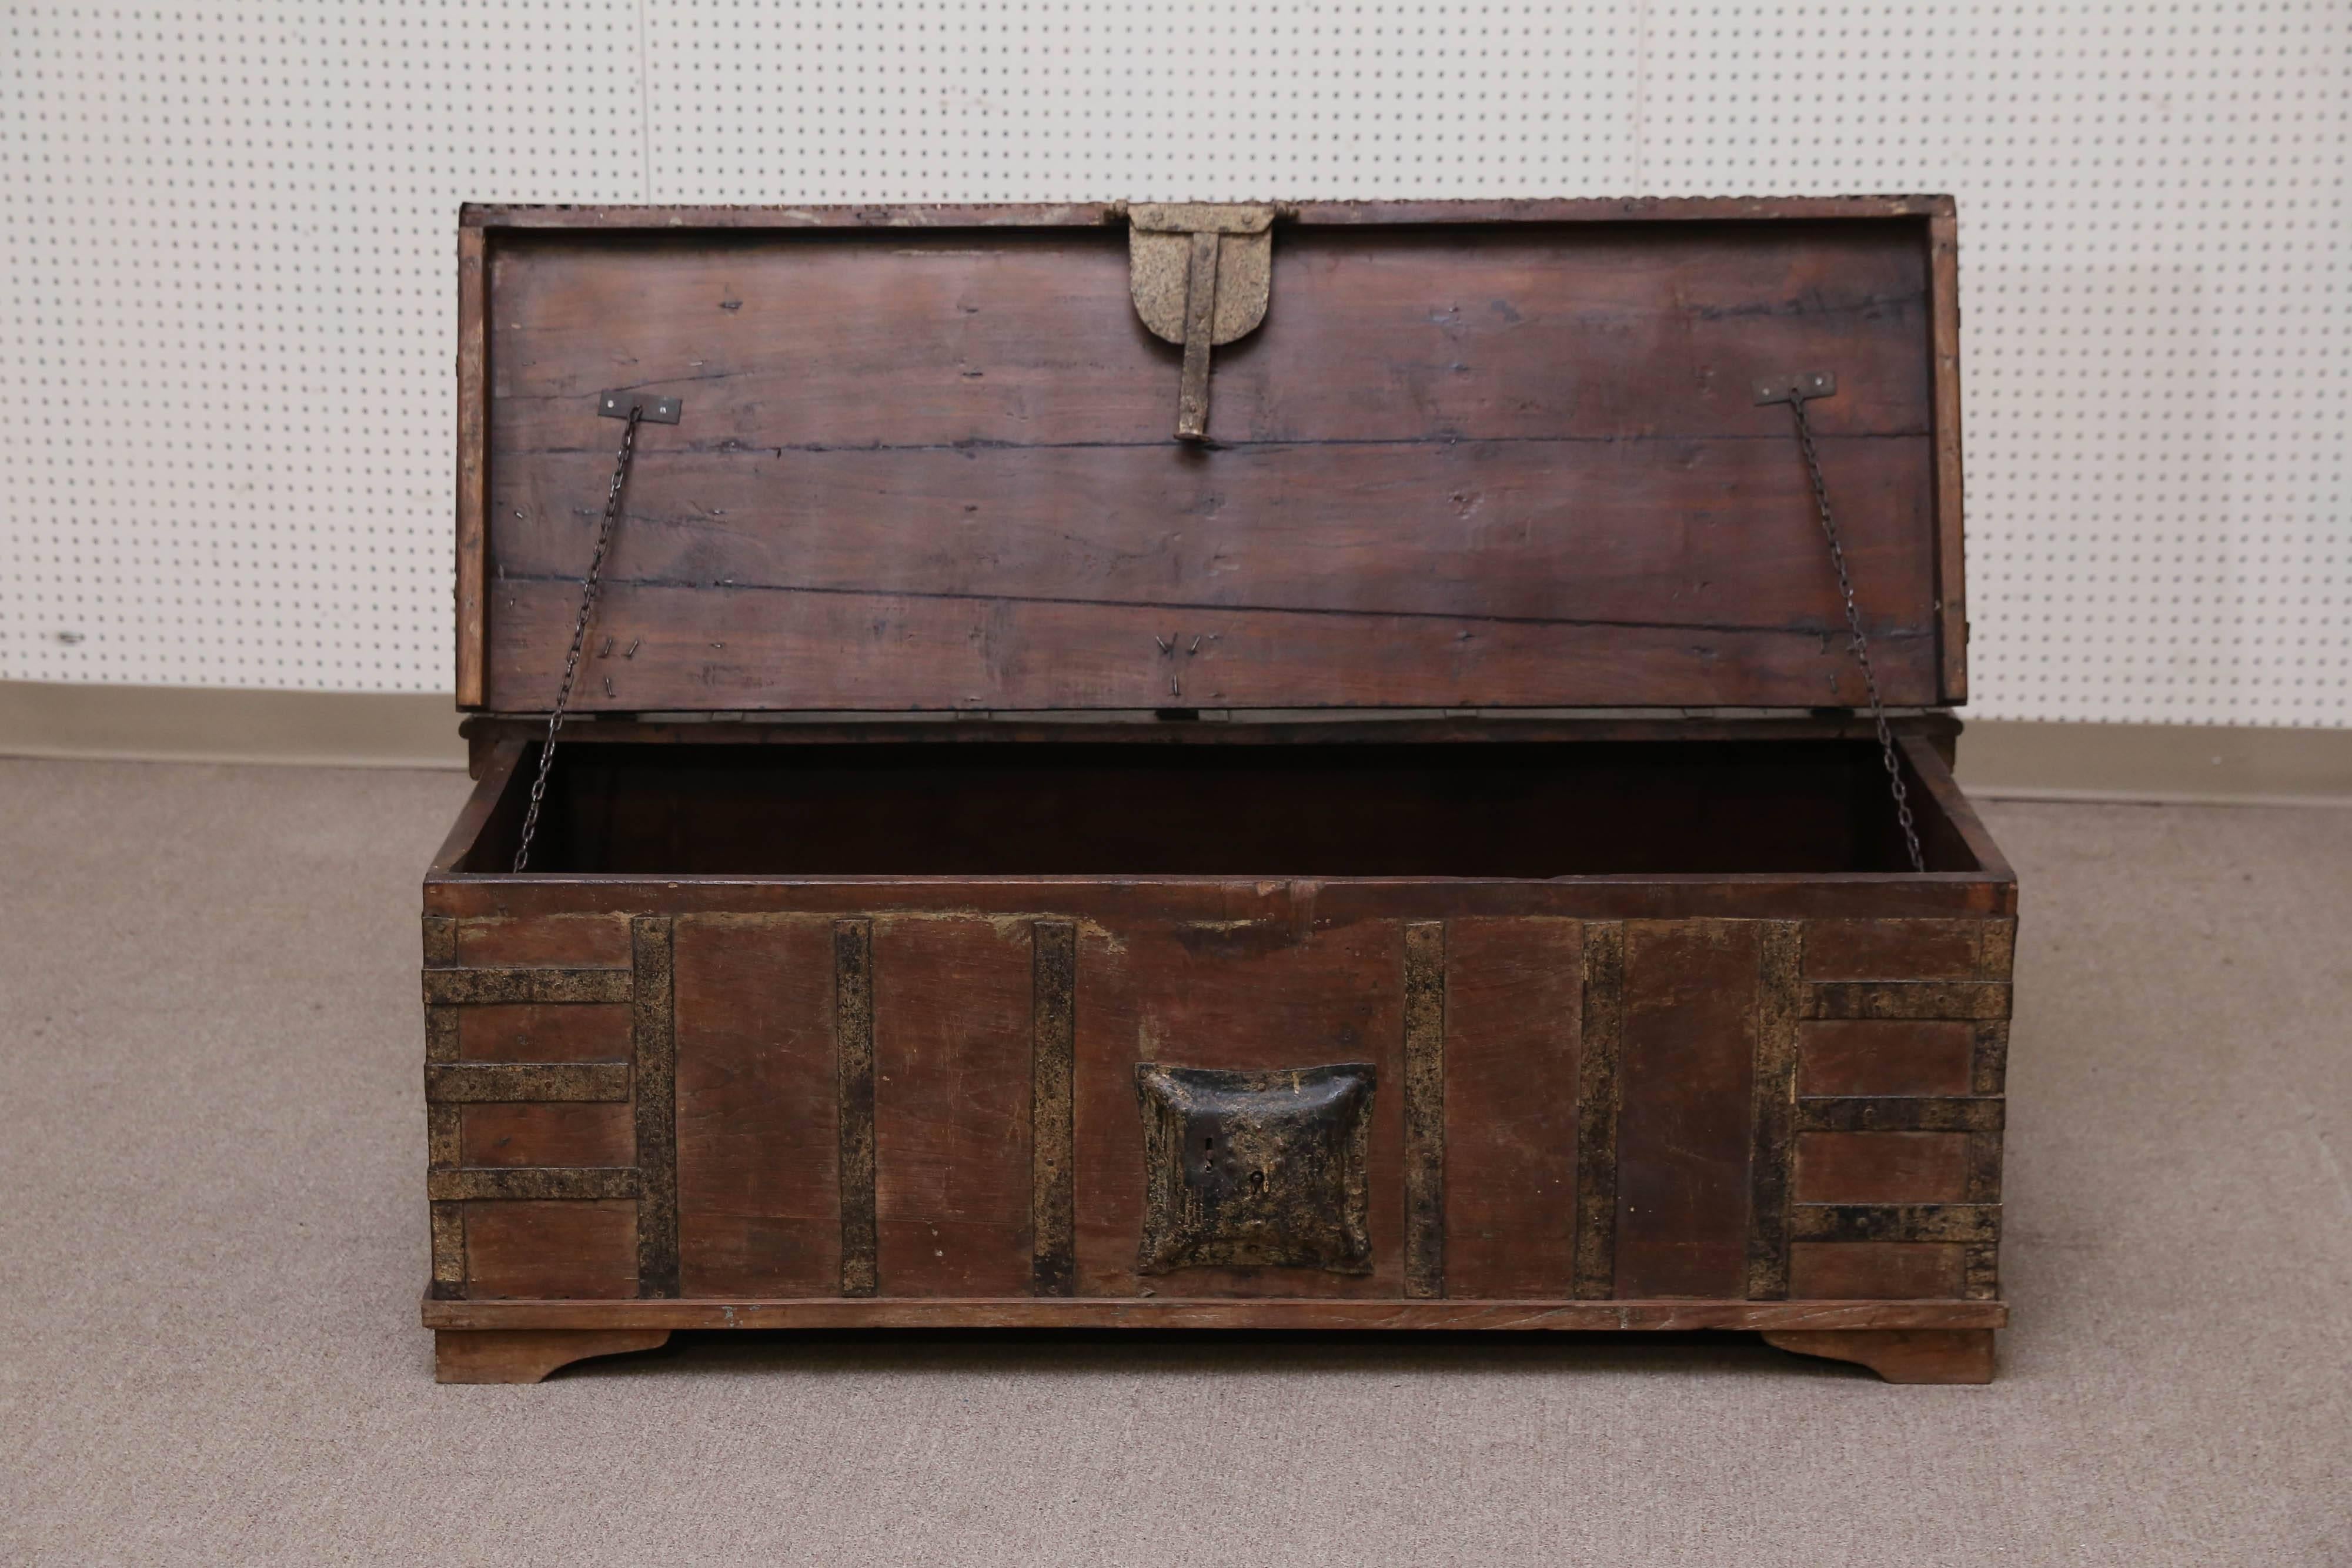 19th Century 1820s Solid Teak Wood Dowry Chest from Central India For Sale